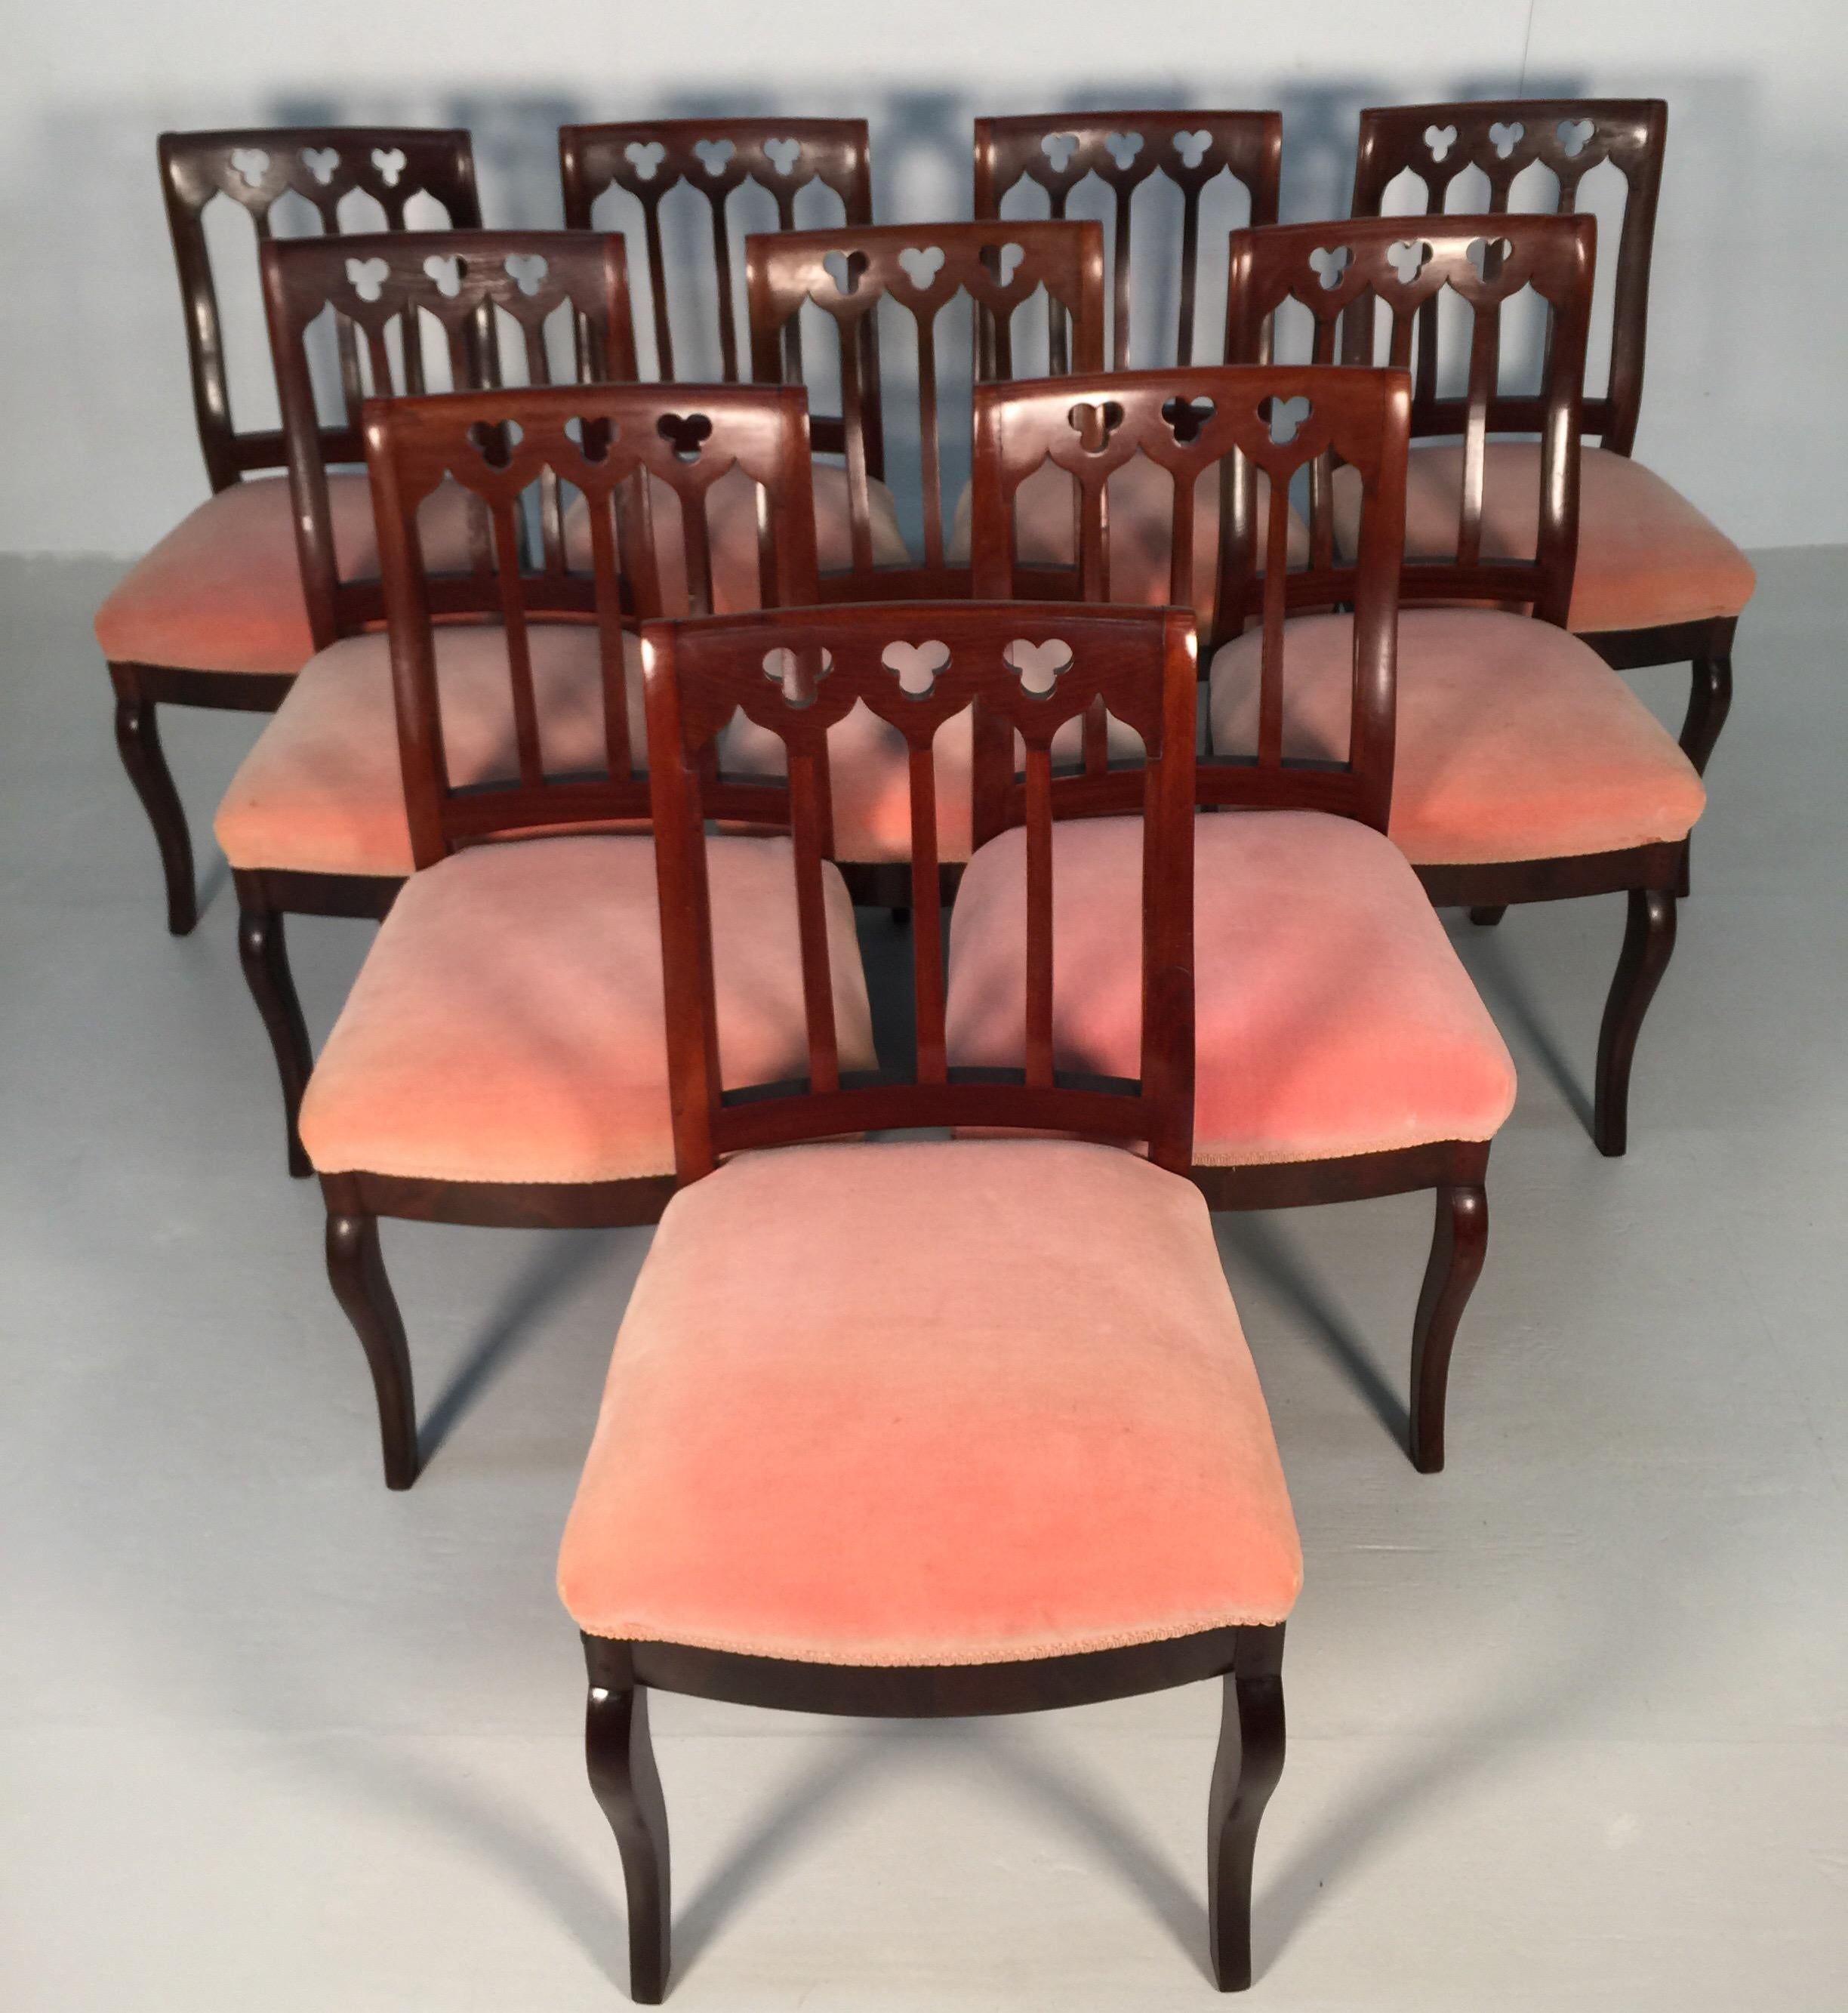 Attributed to John Jelliff , the walnut chairs features carved quatrefoil roundels and arches which distinguishes this as a Jelliff chair